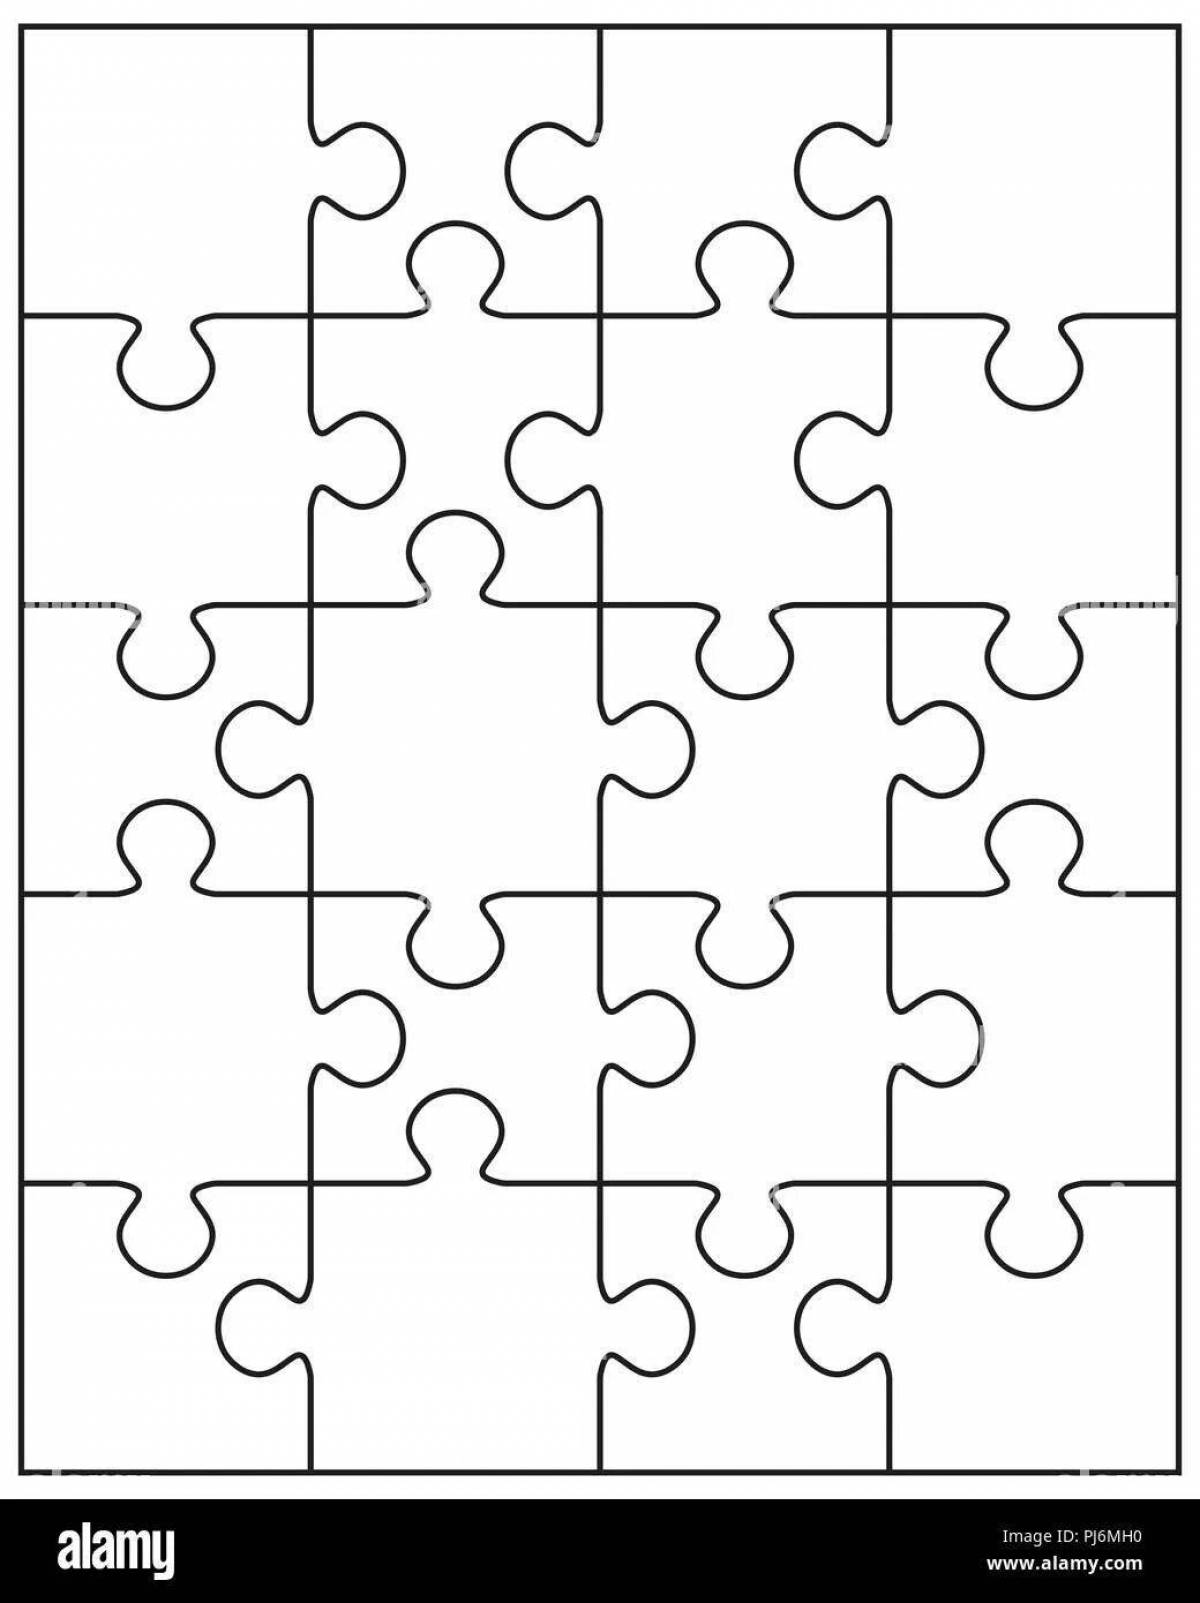 Fun coloring pages and puzzles